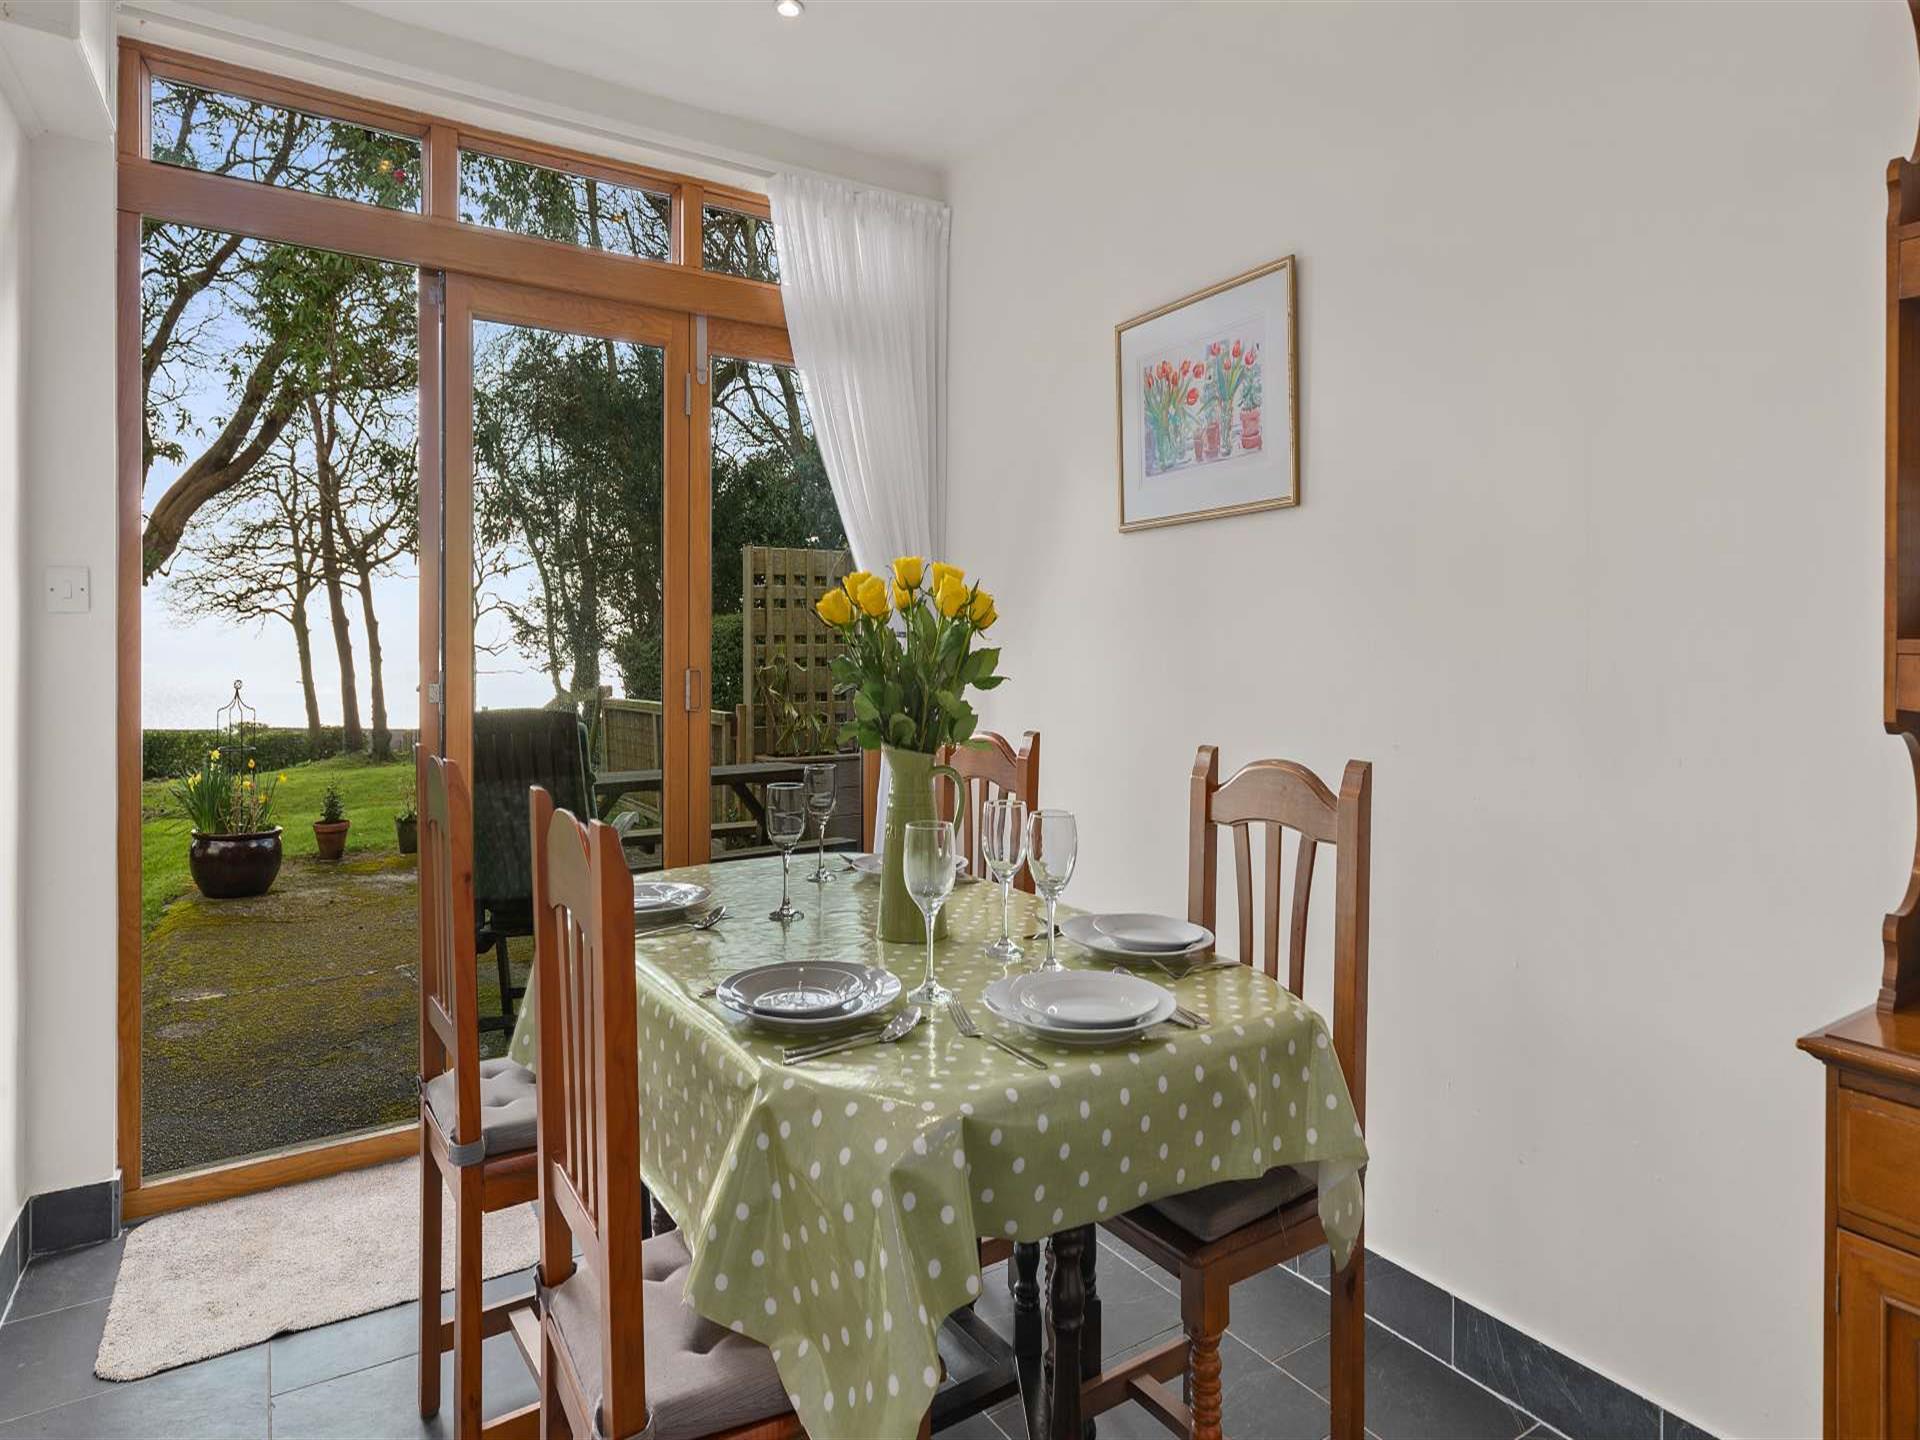 Dining Table with views out to garden and trees